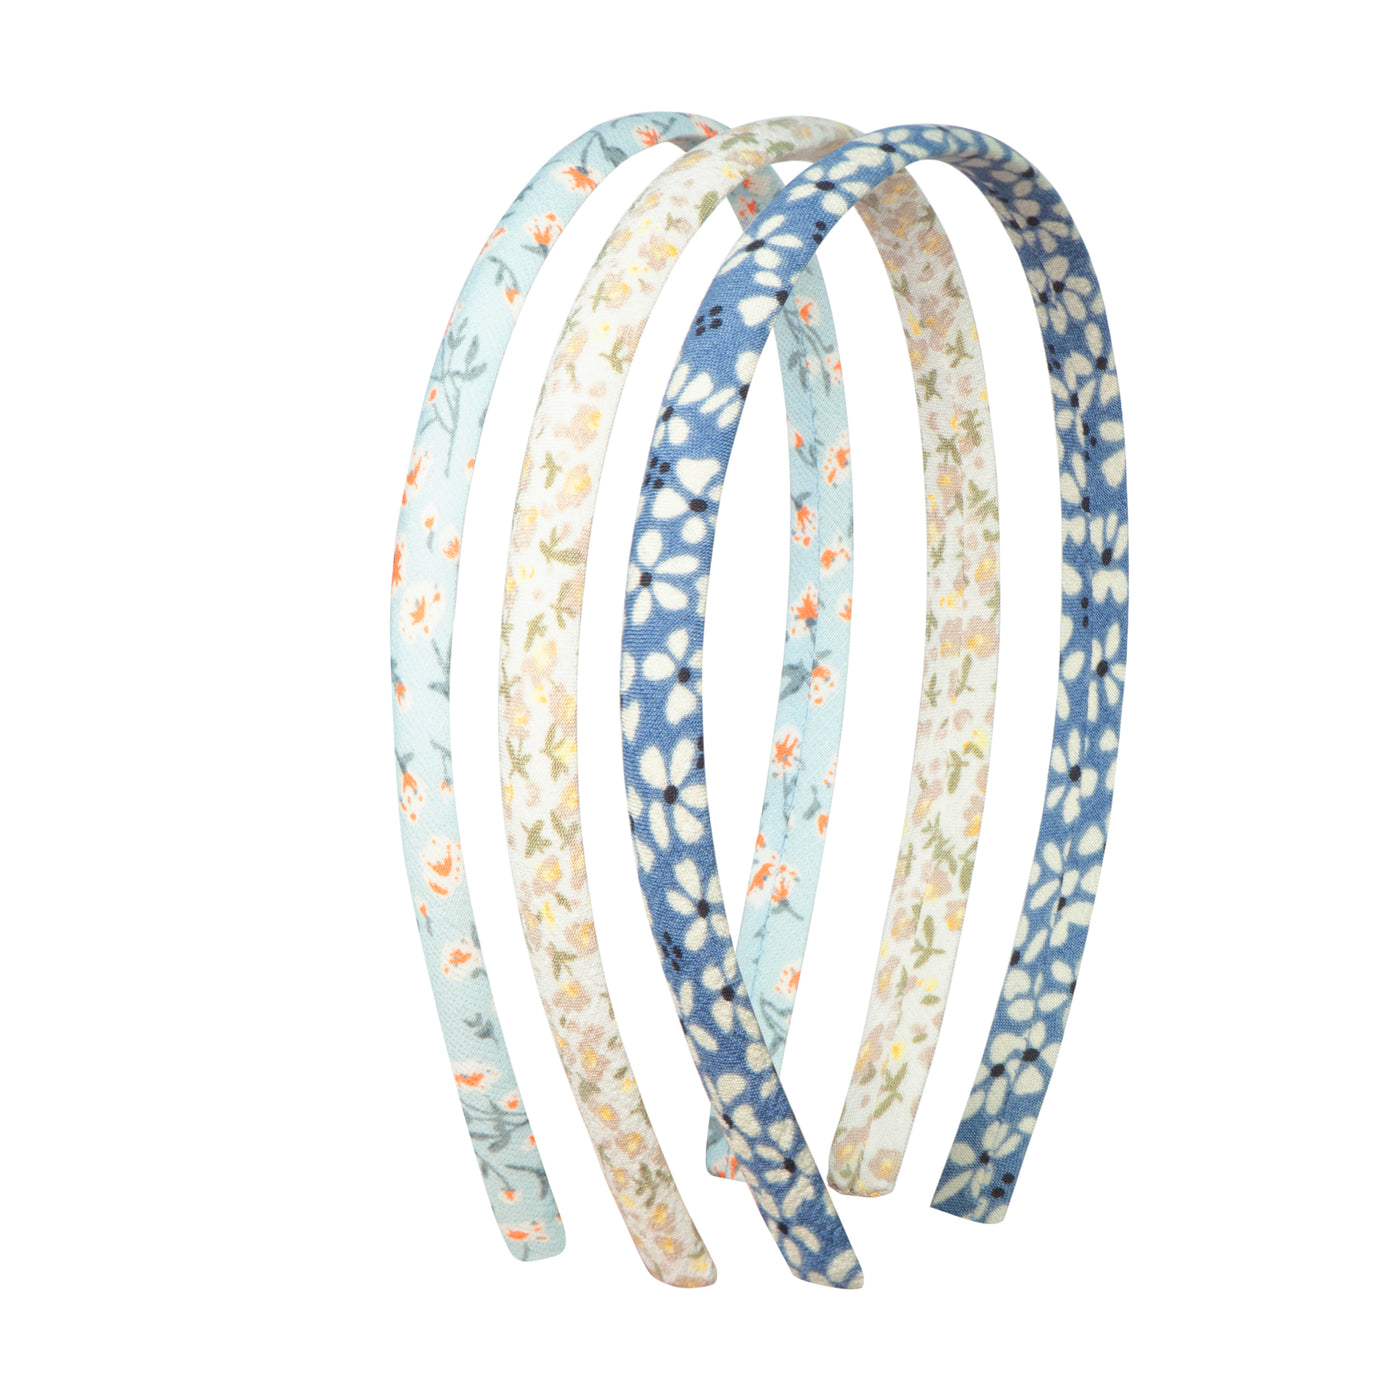 trio of floral print Alice bands